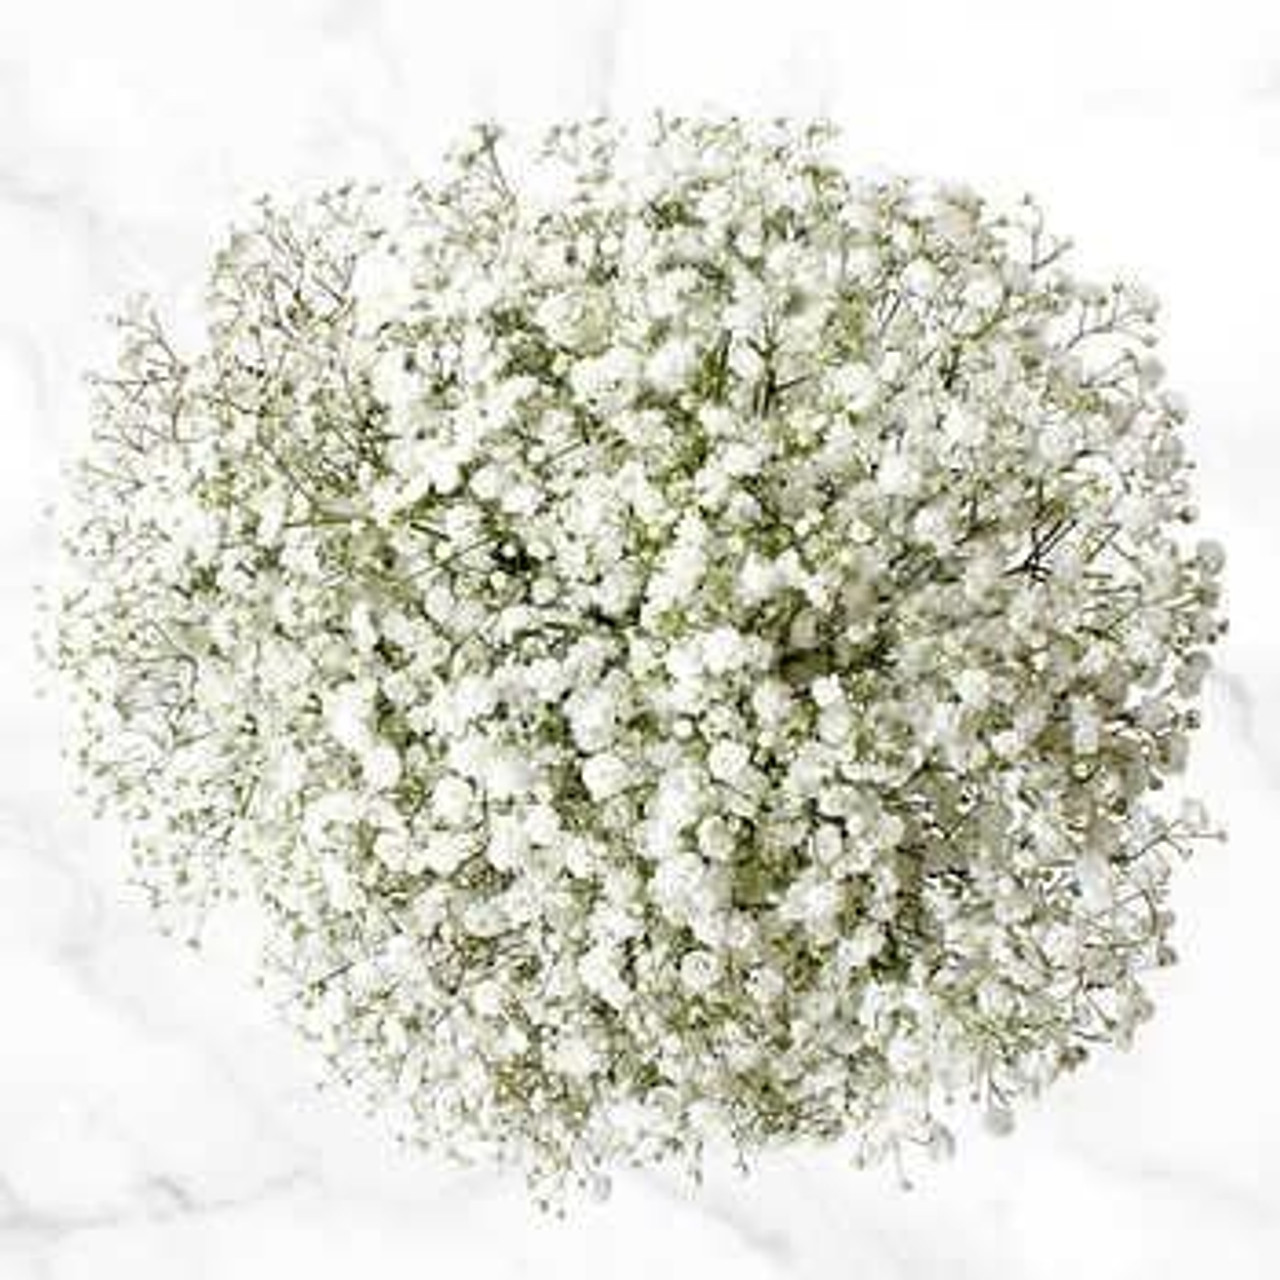 March 2017 Weed of the Month: Baby's Breath